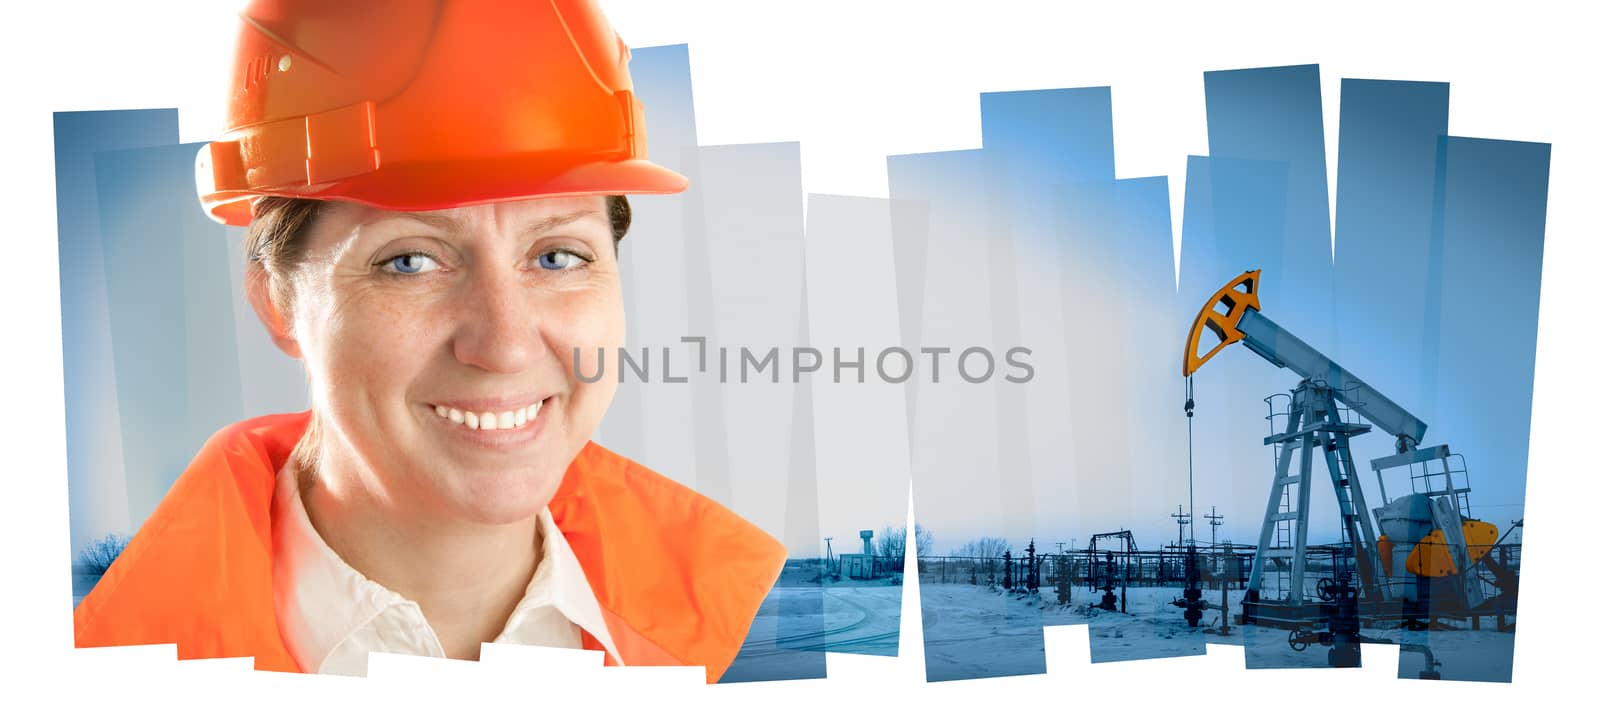 Female oil worker in orange uniform and helmet on of collage background the pump jack.